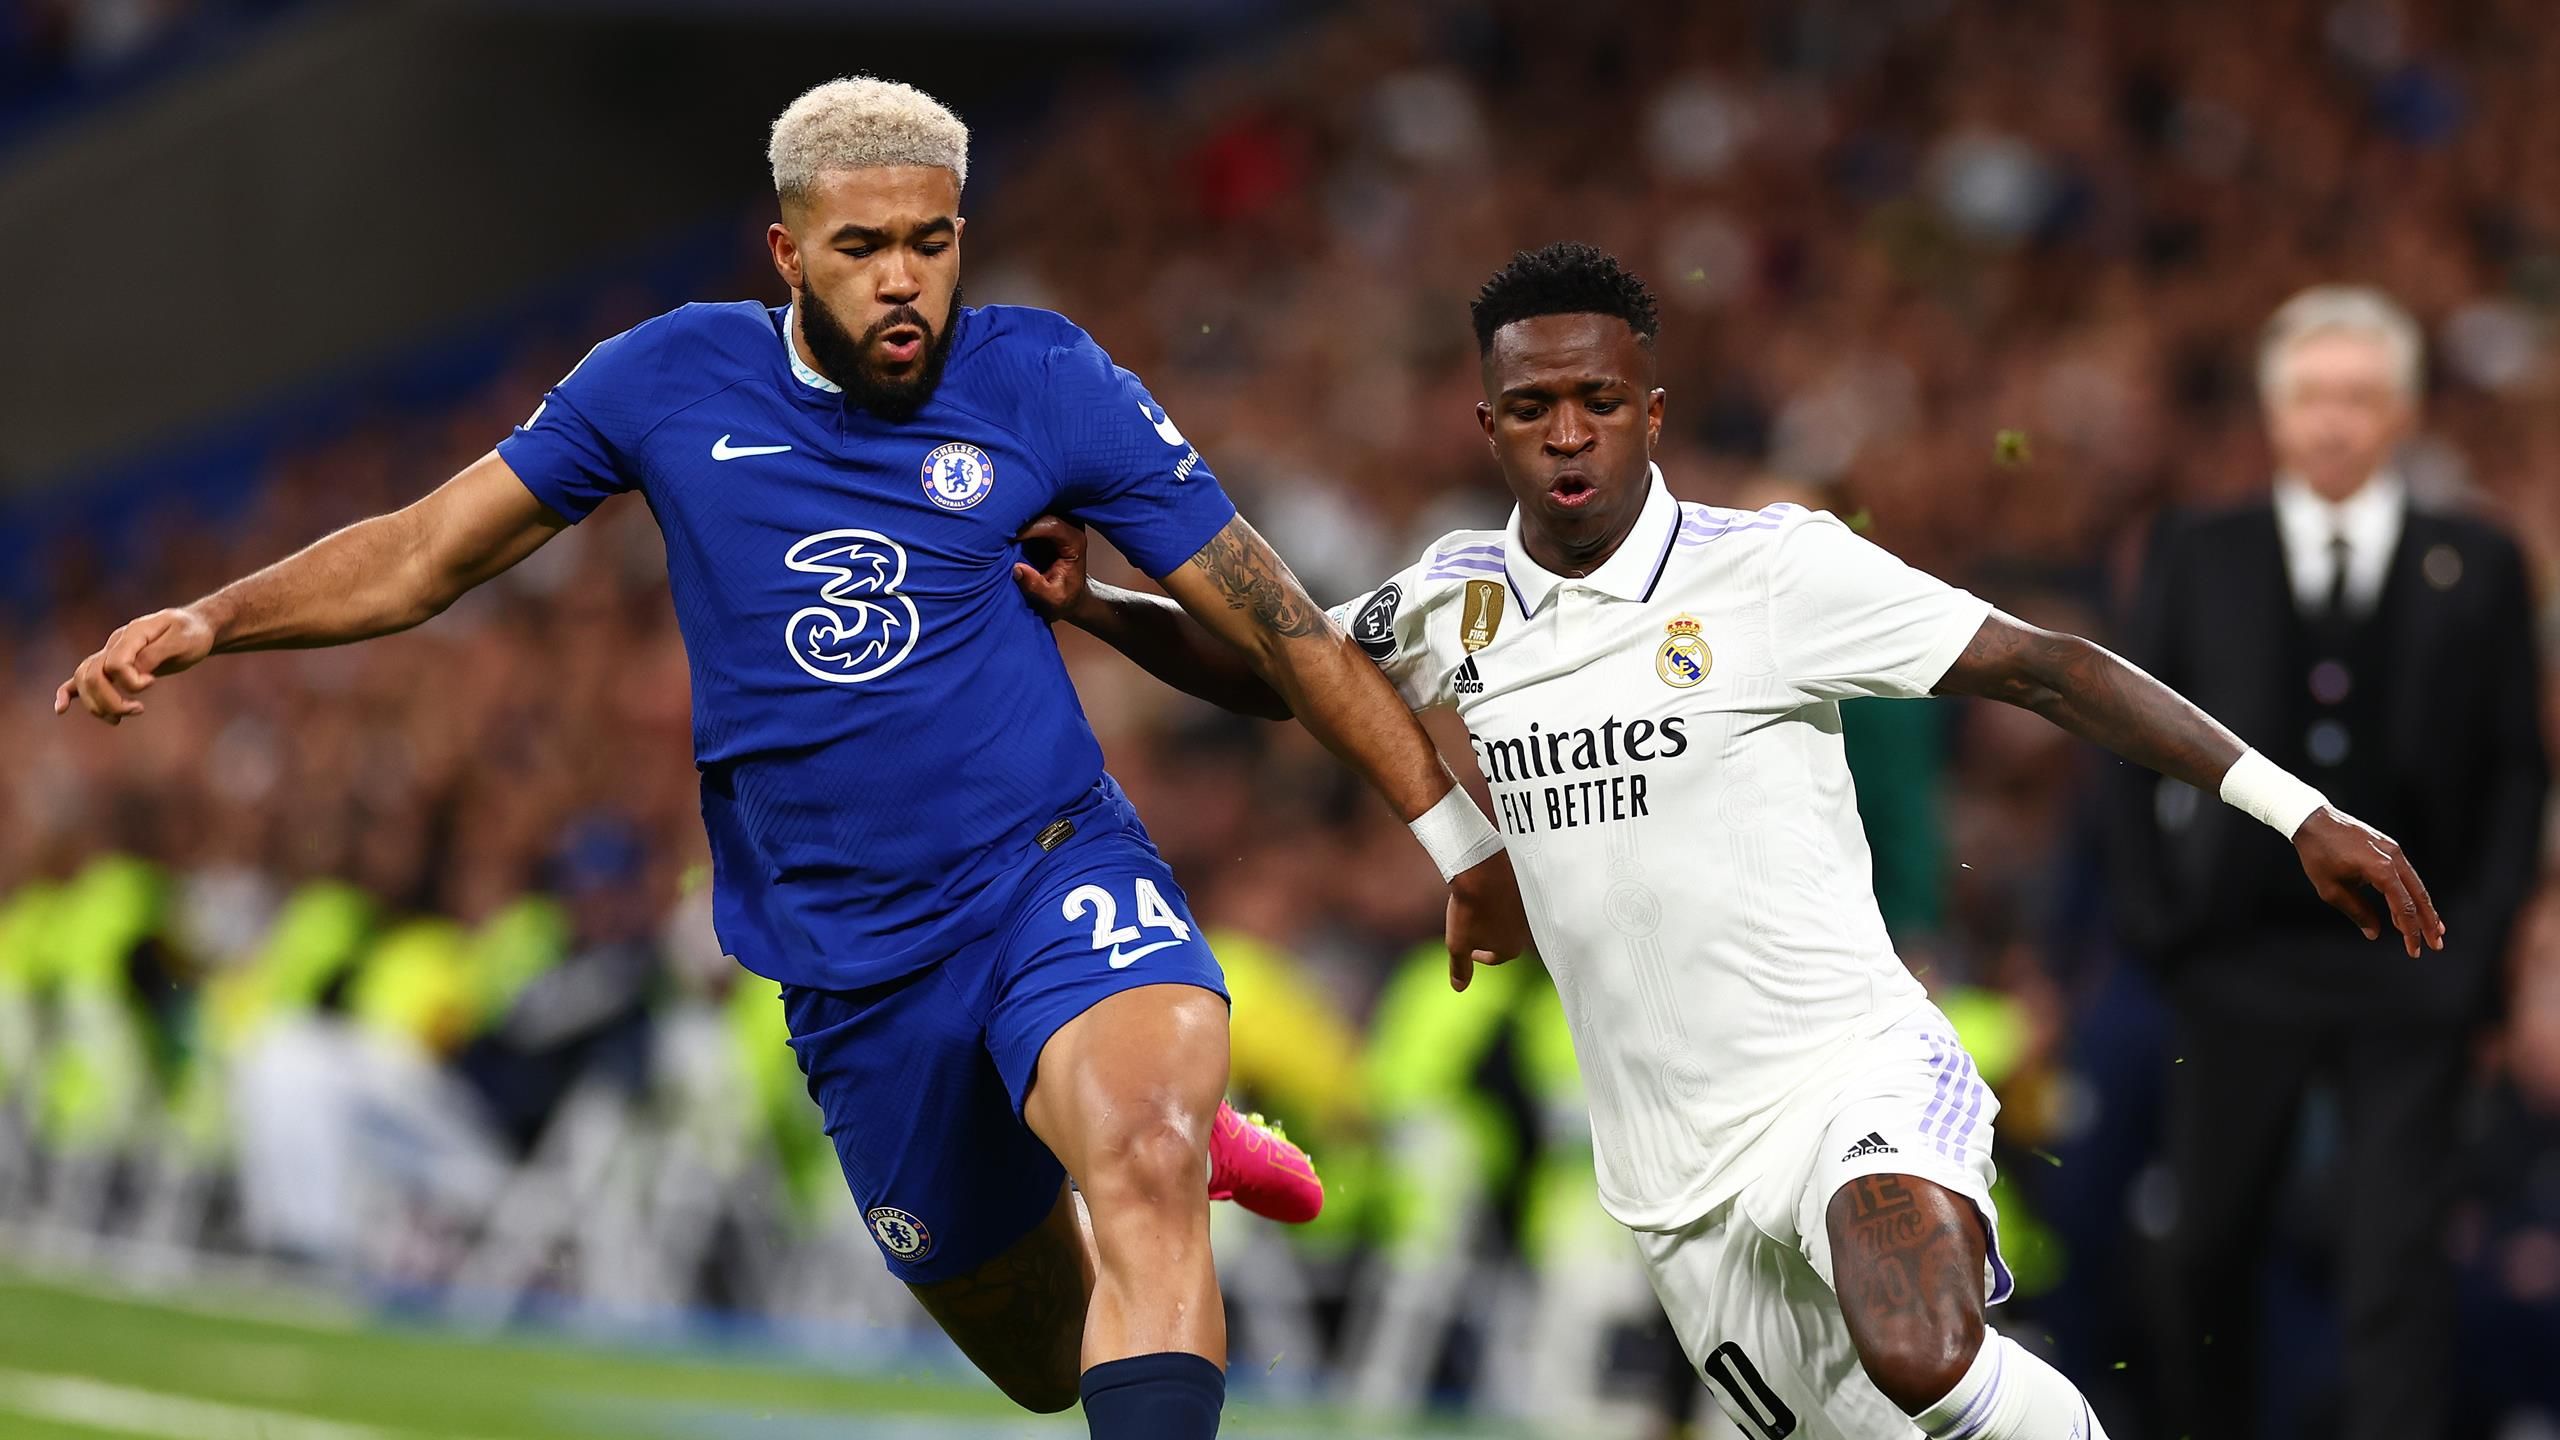 How to watch Chelsea v Real Madrid in the Champions League quarter-final TV channel, live stream details, kick-off time